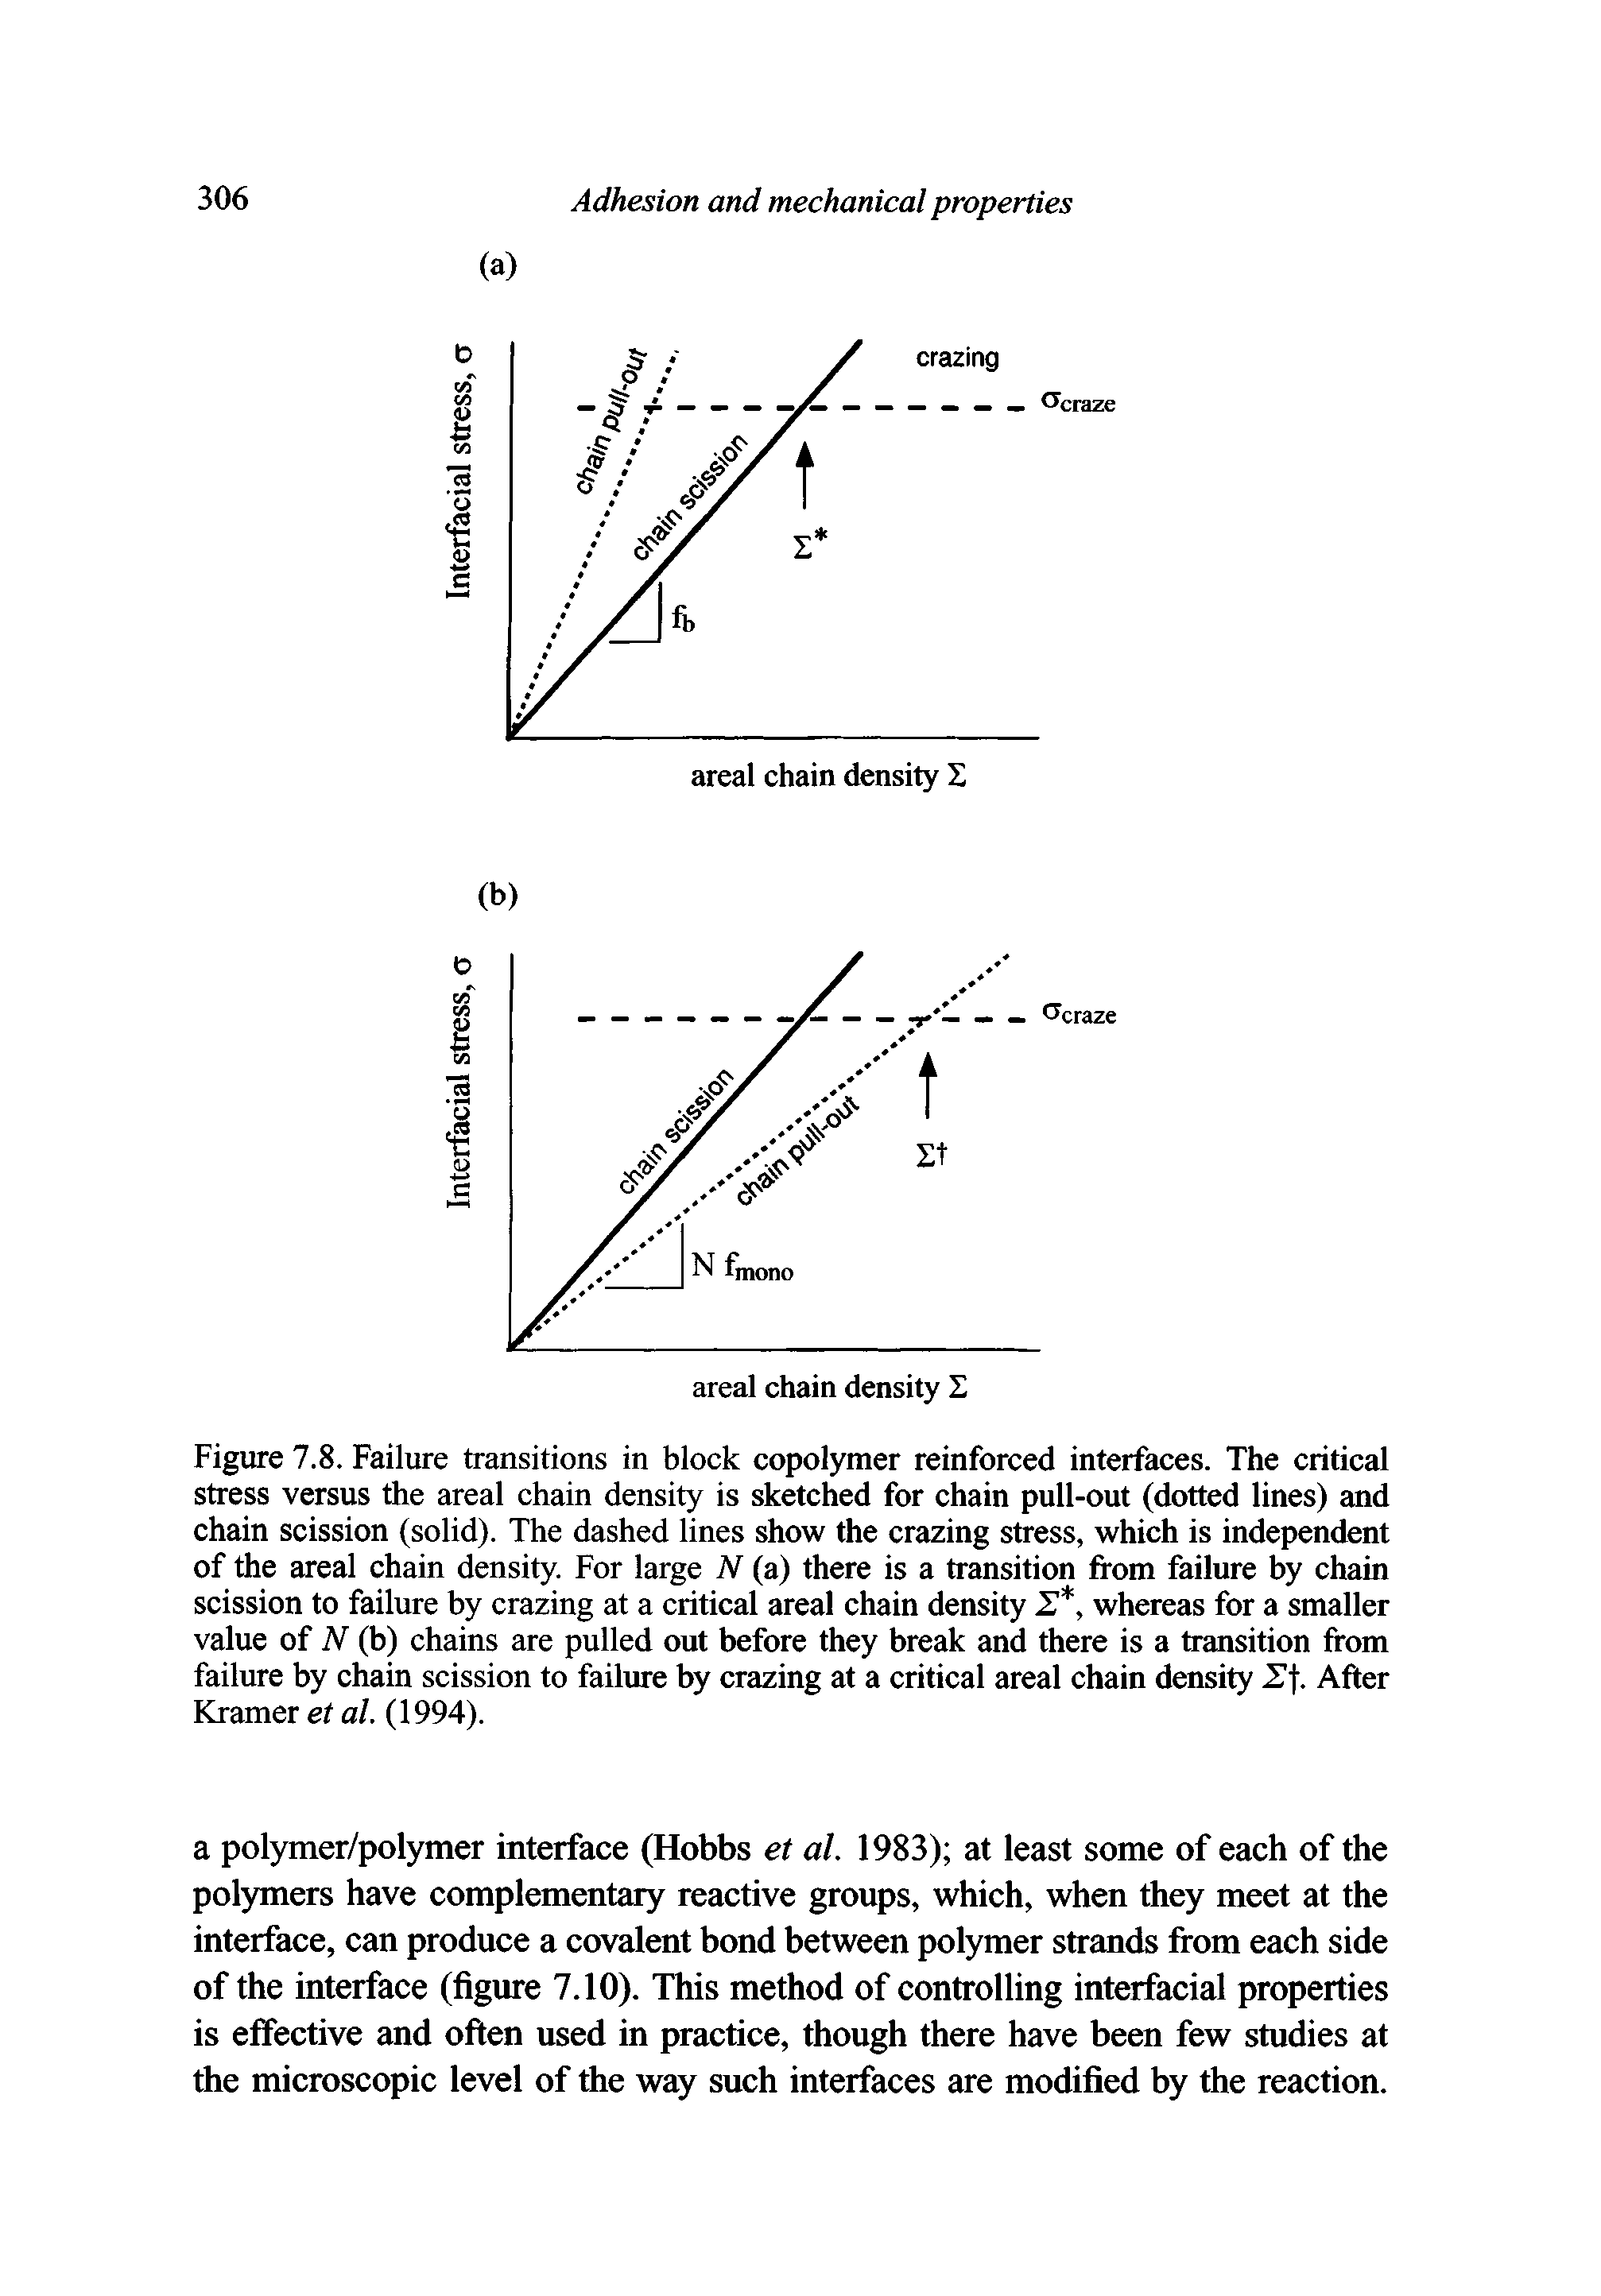 Figure 7.8. Failure transitions in block copolymer reinforced interfaces. The critical stress versus the areal chain density is sketched for chain pull-out (dotted lines) and chain scission (solid). The dashed lines show the crazing stress, which is independent of the areal chain density. For large N (a) there is a transition from failure by chain scission to failure by crazing at a critical areal chain density whereas for a smaller value of N (b) chains are pulled out before they break and there is a transition from failure by chain scission to failure by crazing at a critical areal chain density After Kramer et al. (1994).